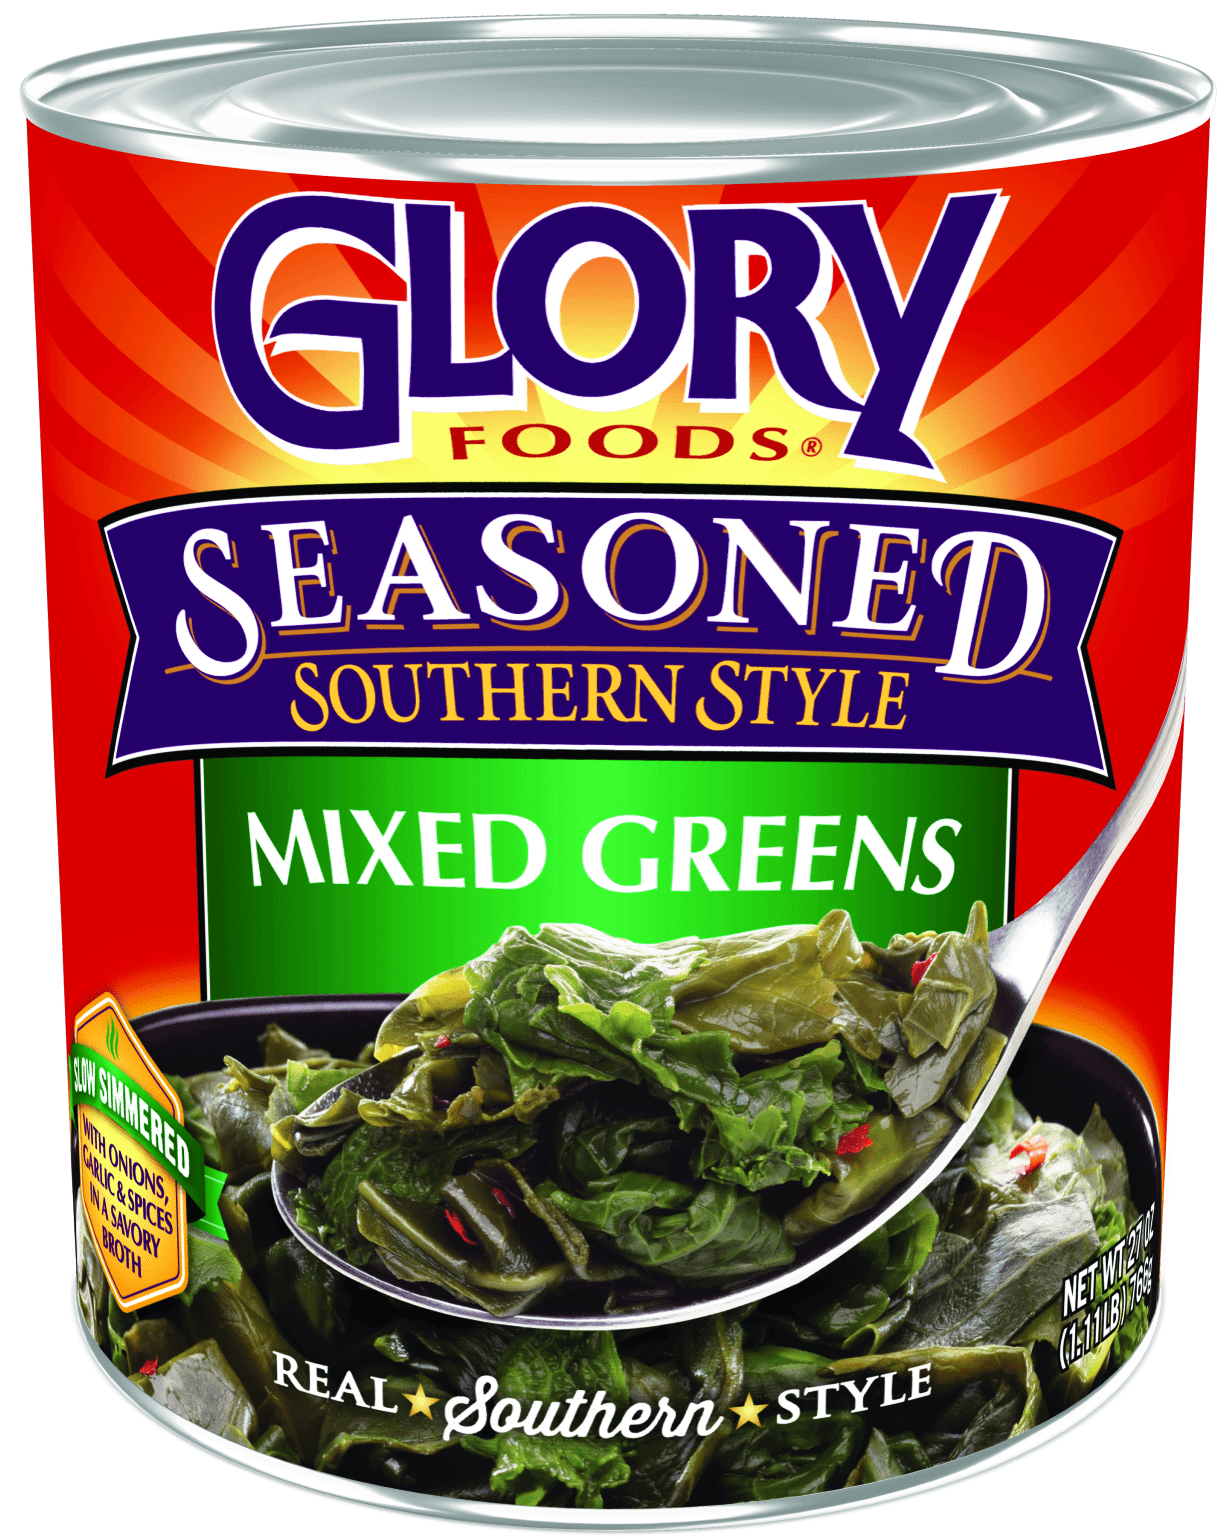 Glory Foods Seasoned Southern Style Mixed Greens, Canned Vegetables, 27 ...